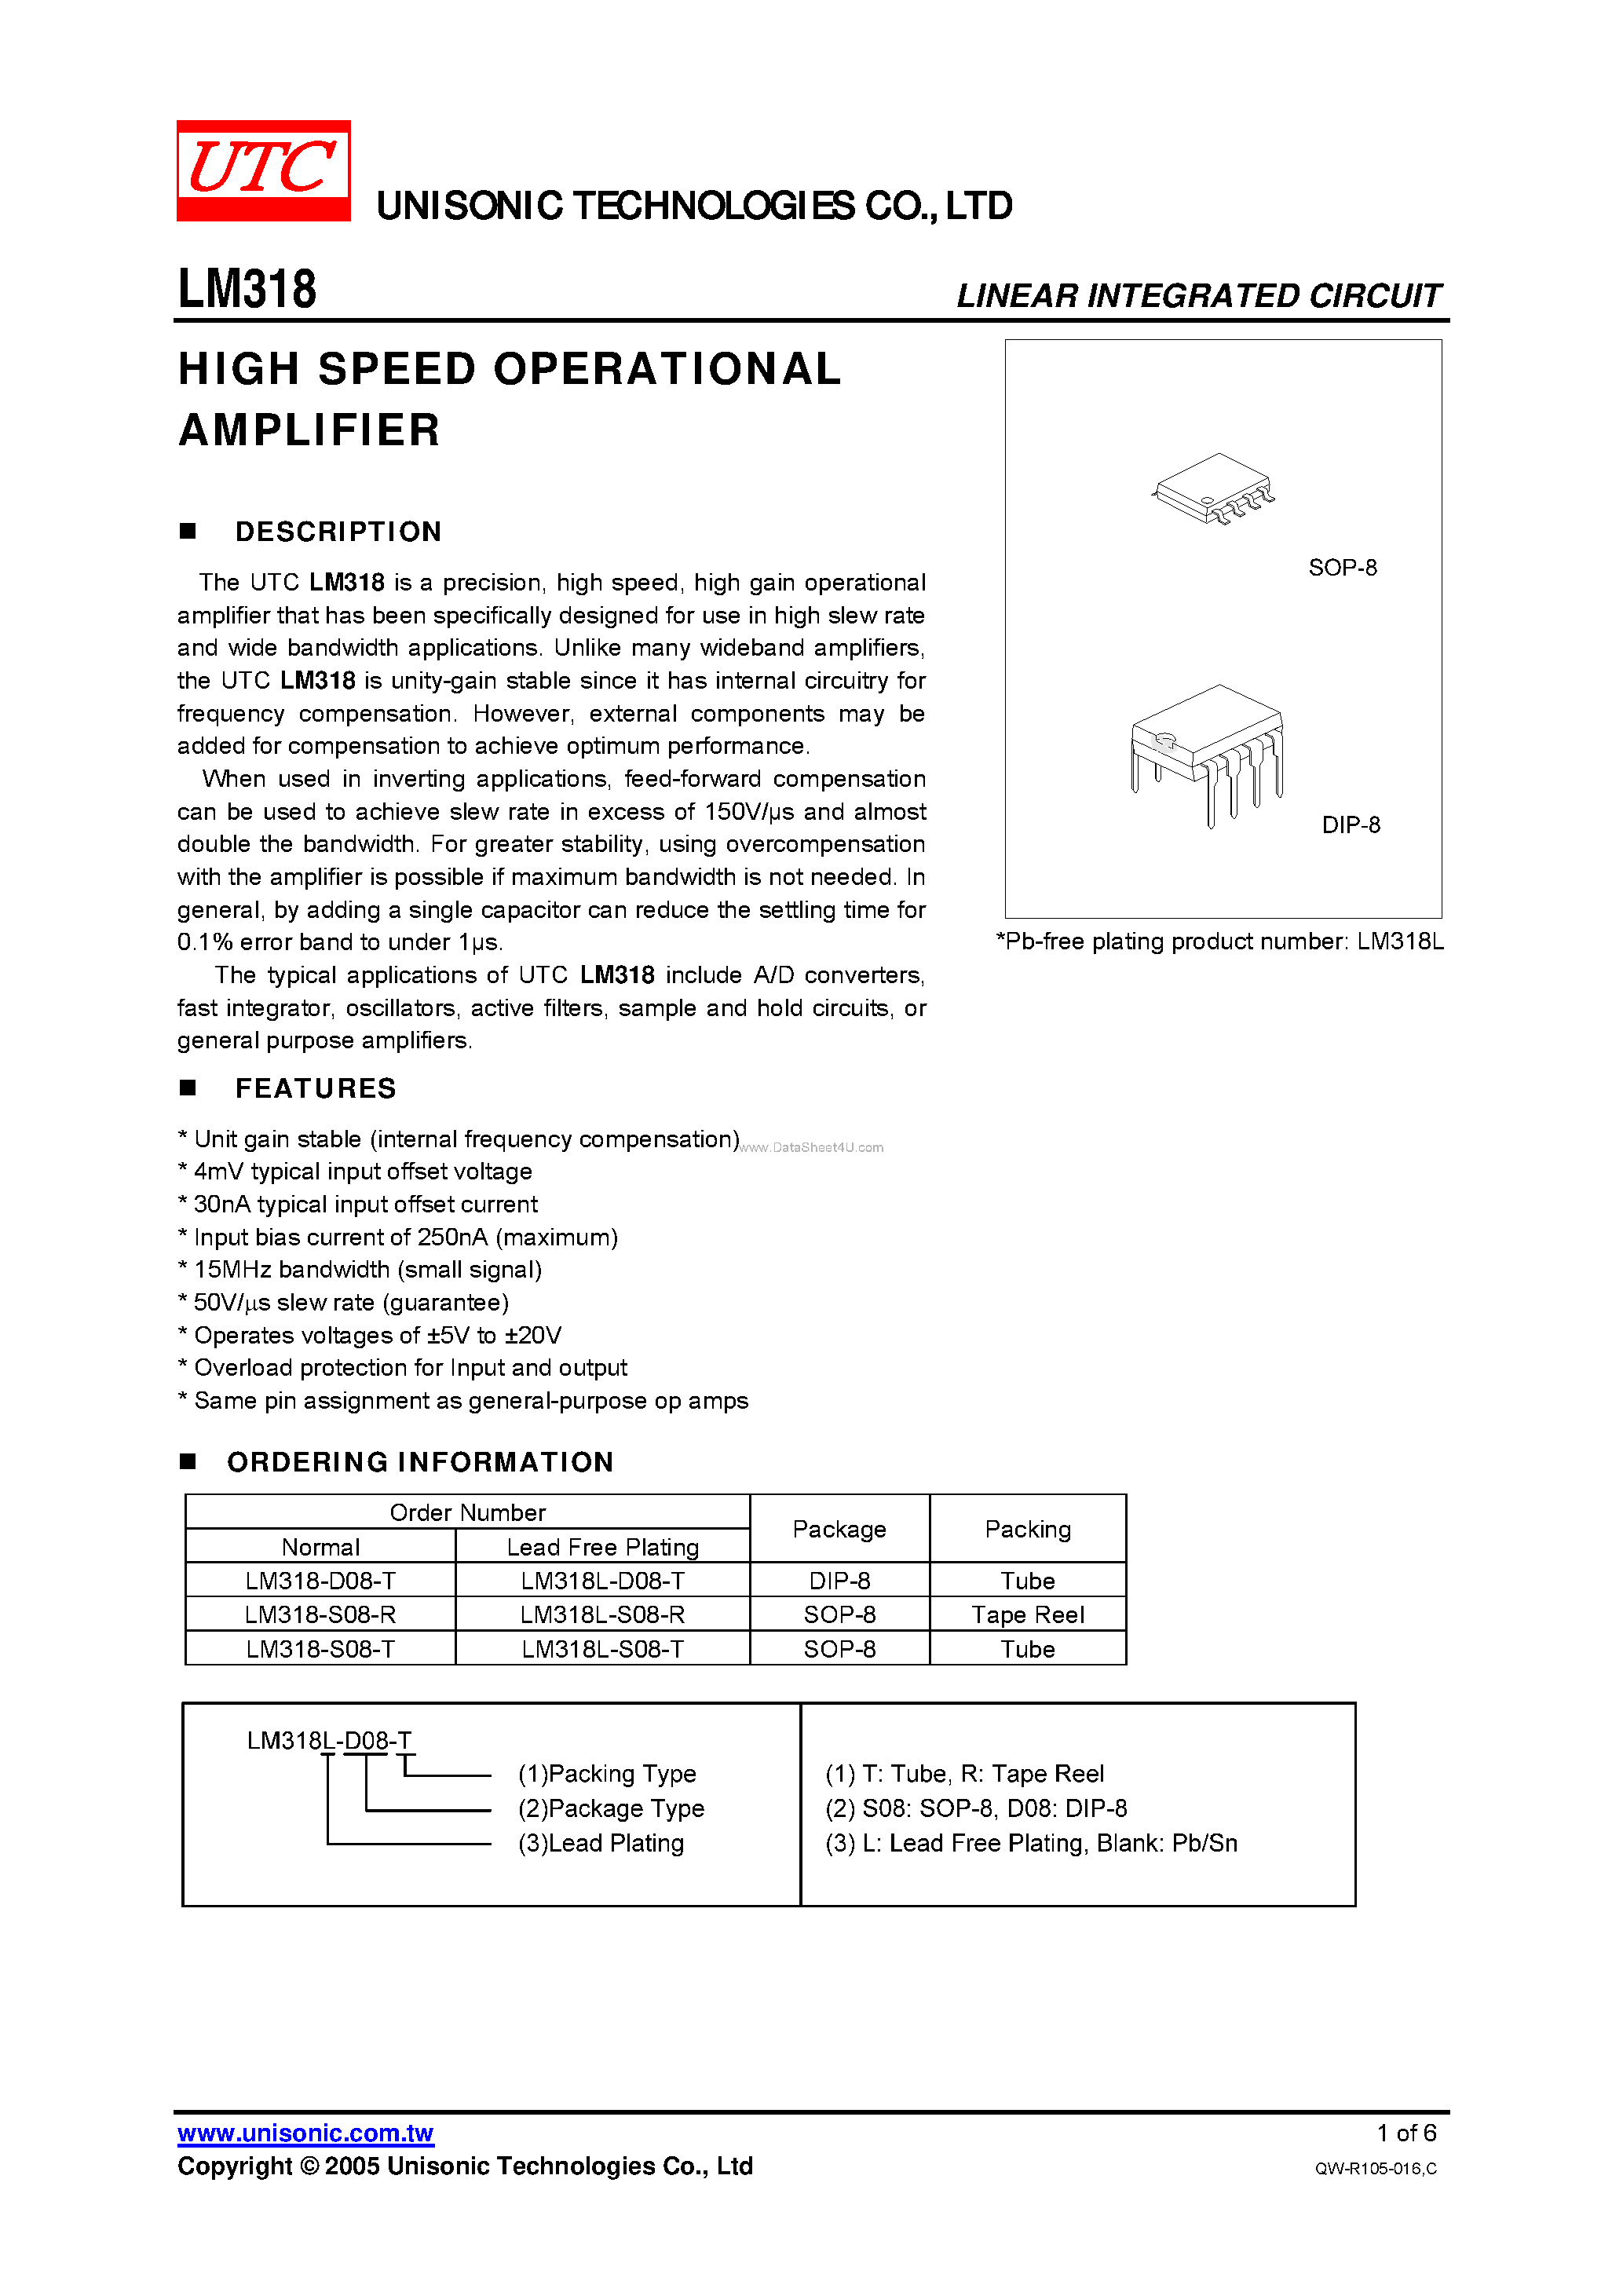 Даташит LM318 - HIGH SPEED OPERATIONAL AMPLIFIER страница 1